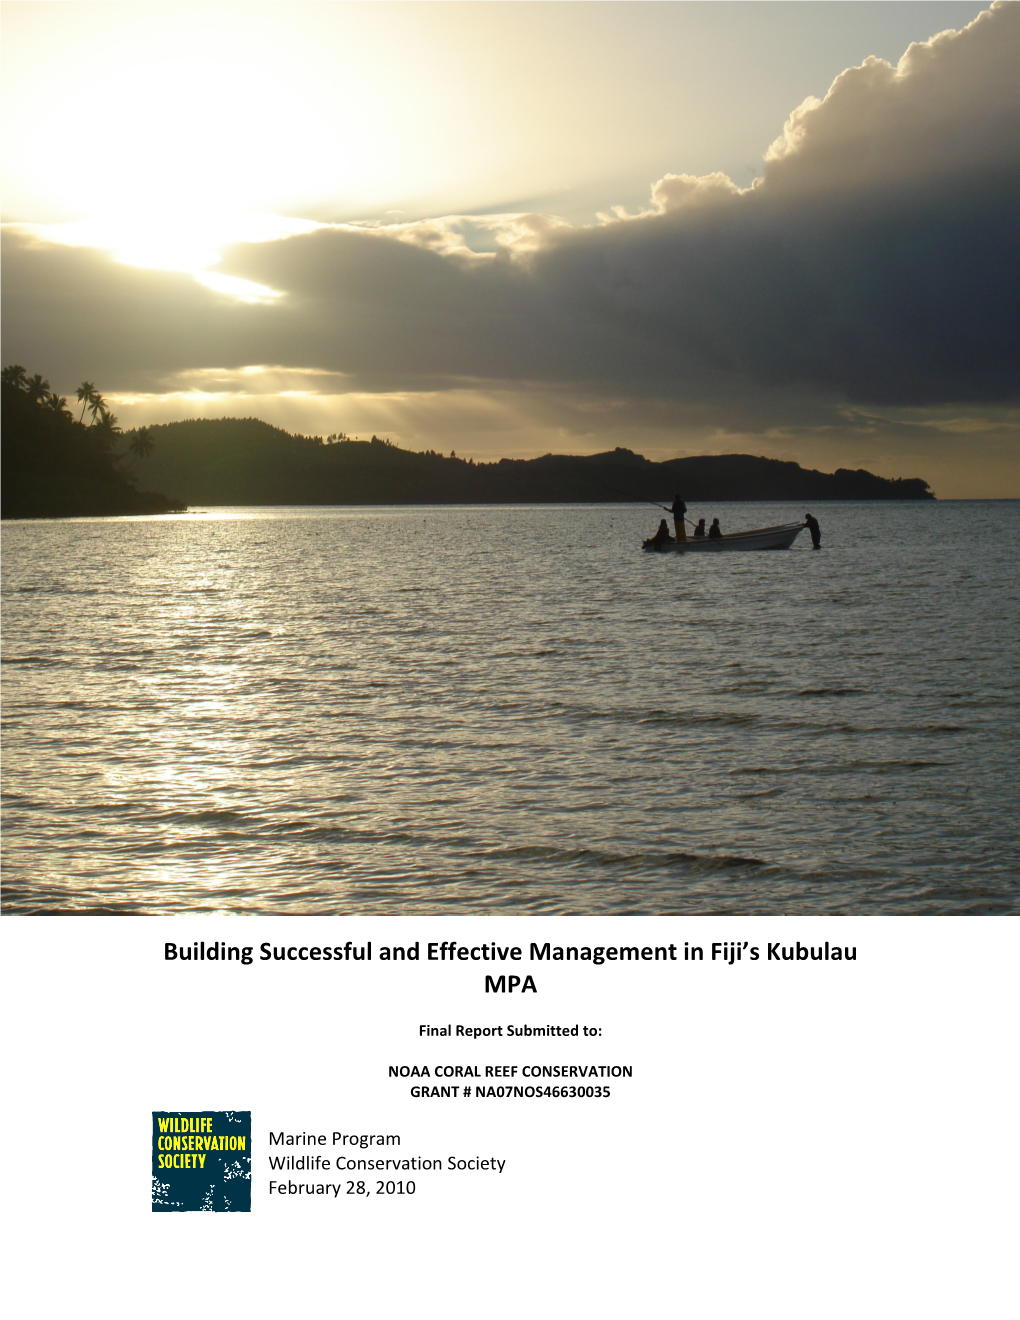 Building Successful and Effective Management in Fiji's Kubulau